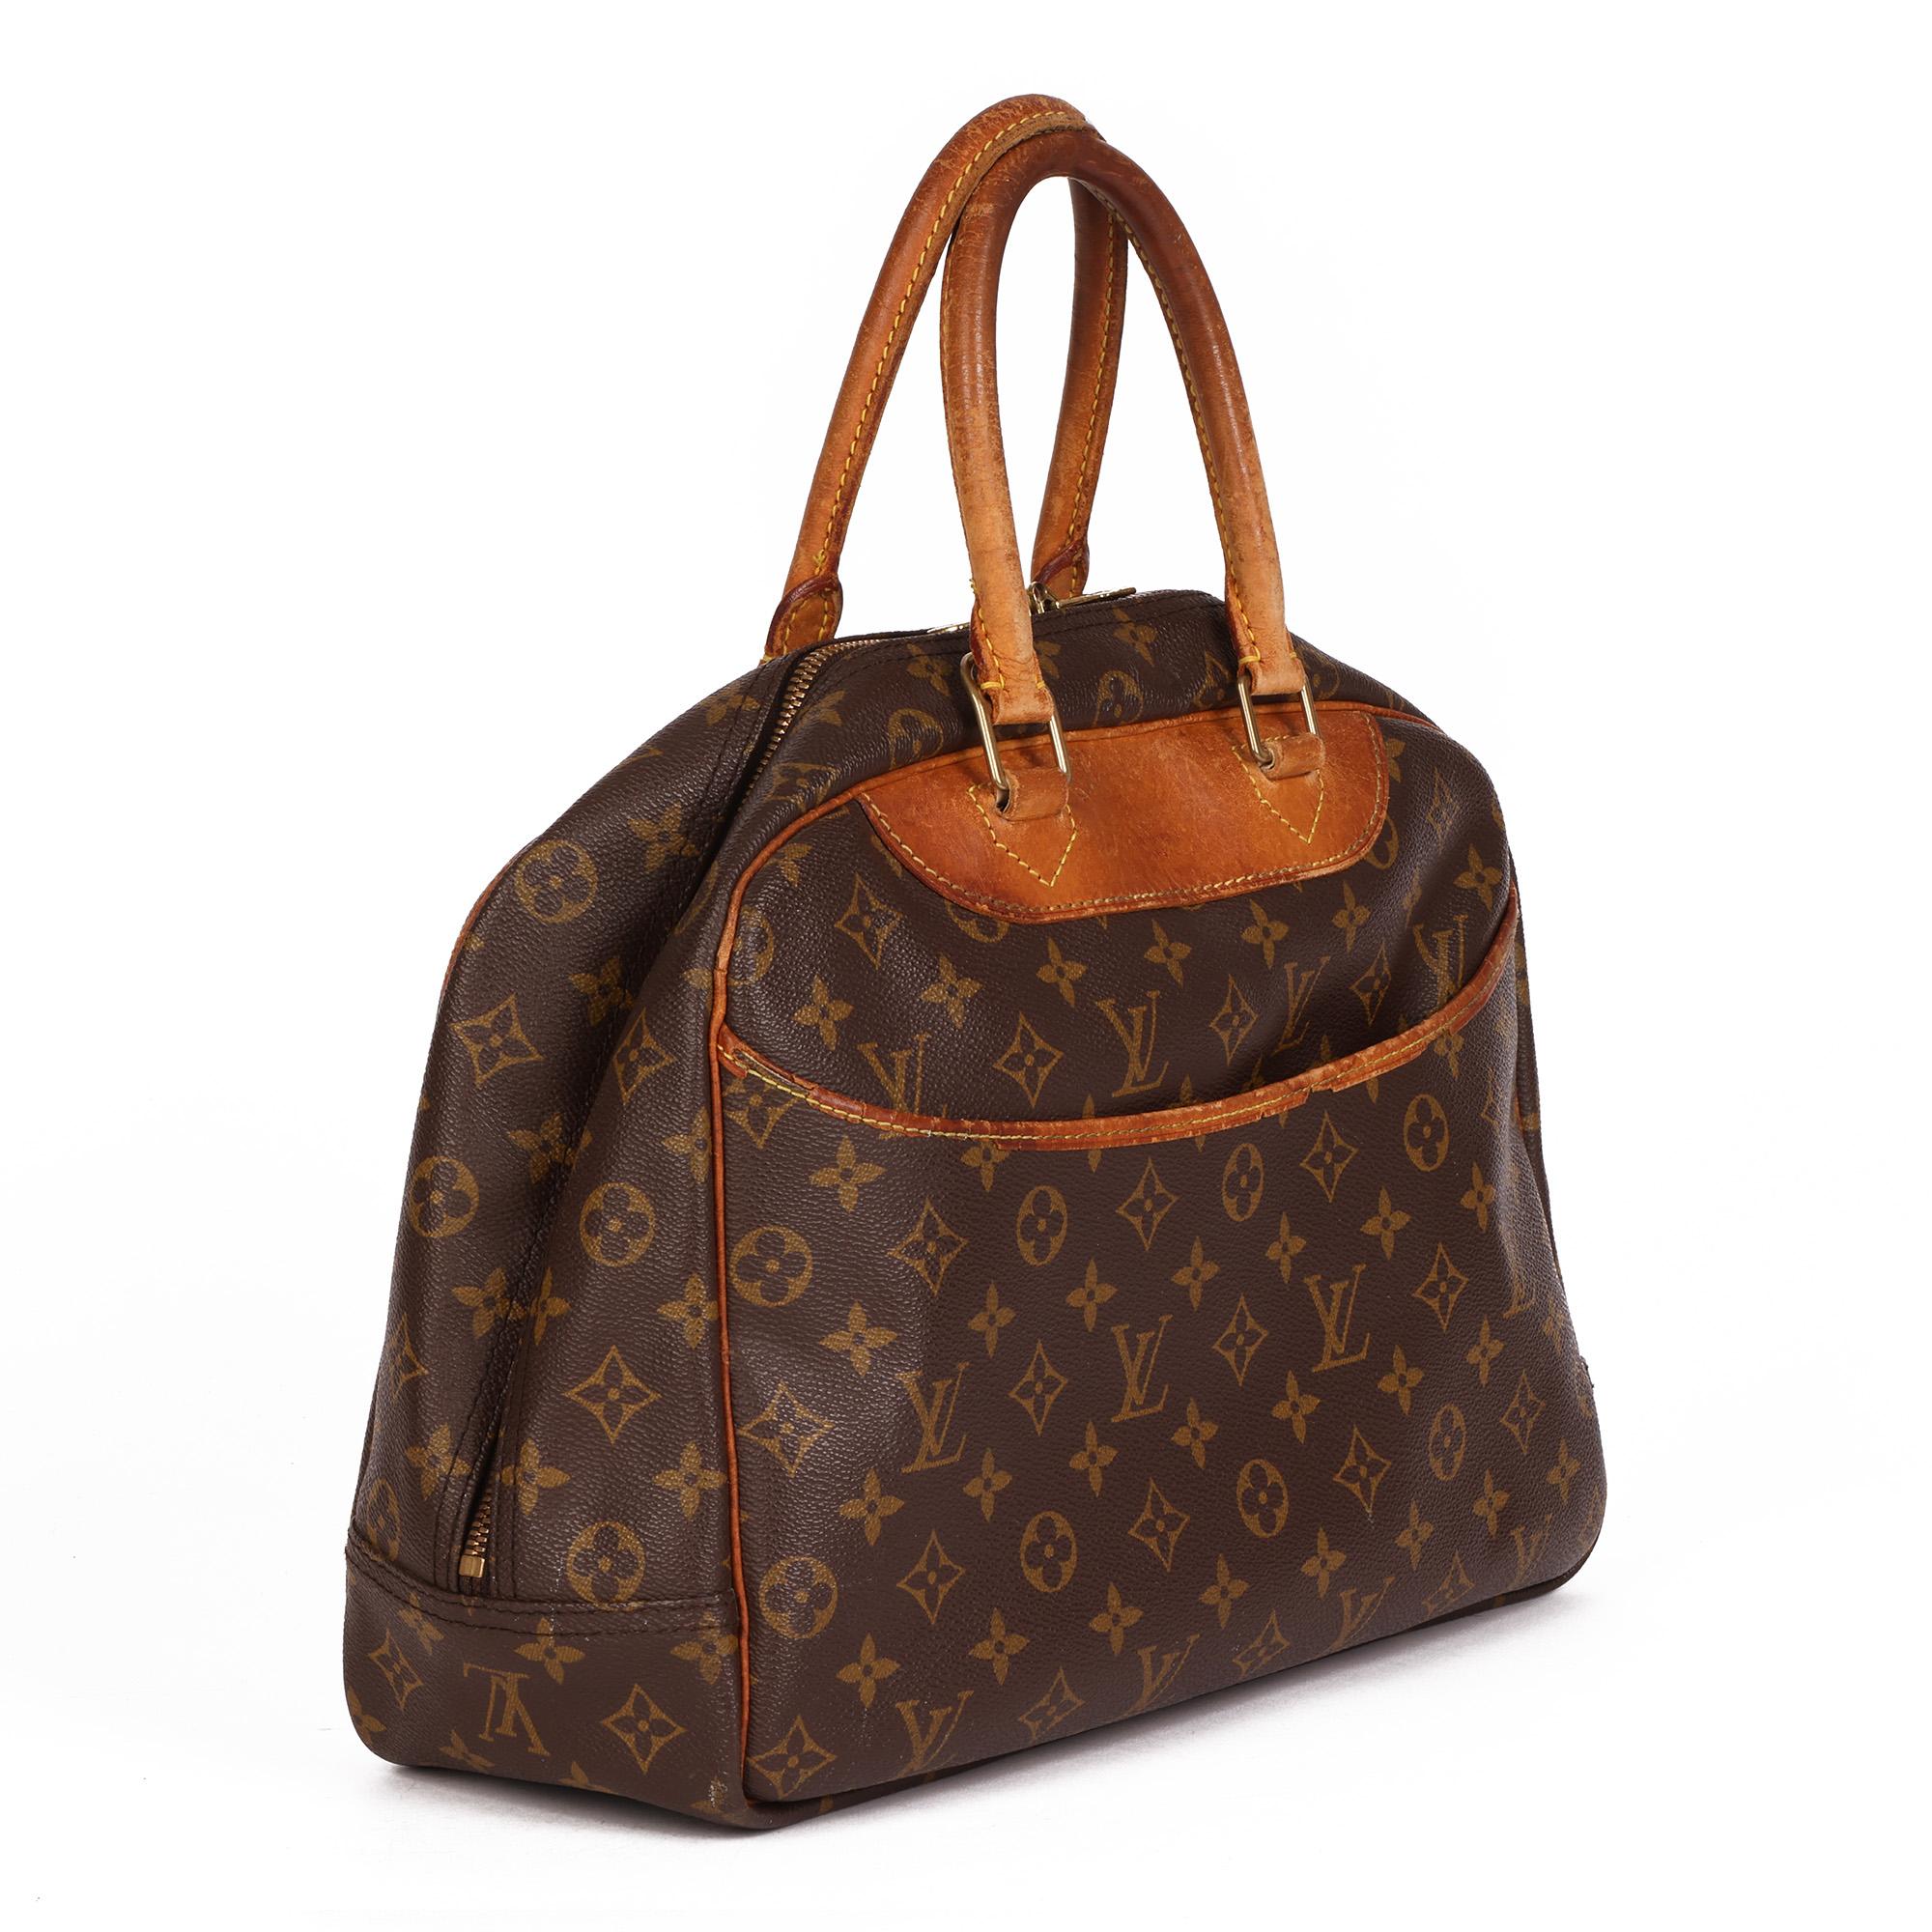 Louis Vuitton BROWN MONOGRAM COATED CANVAS & VACHETTA LEATHER VINTAGE DEAUVILLE

CONDITION NOTES
The exterior is in fair condition with heavy signs of use. There is a small tear in the coated canvas.
The interior is in good condition with moderate